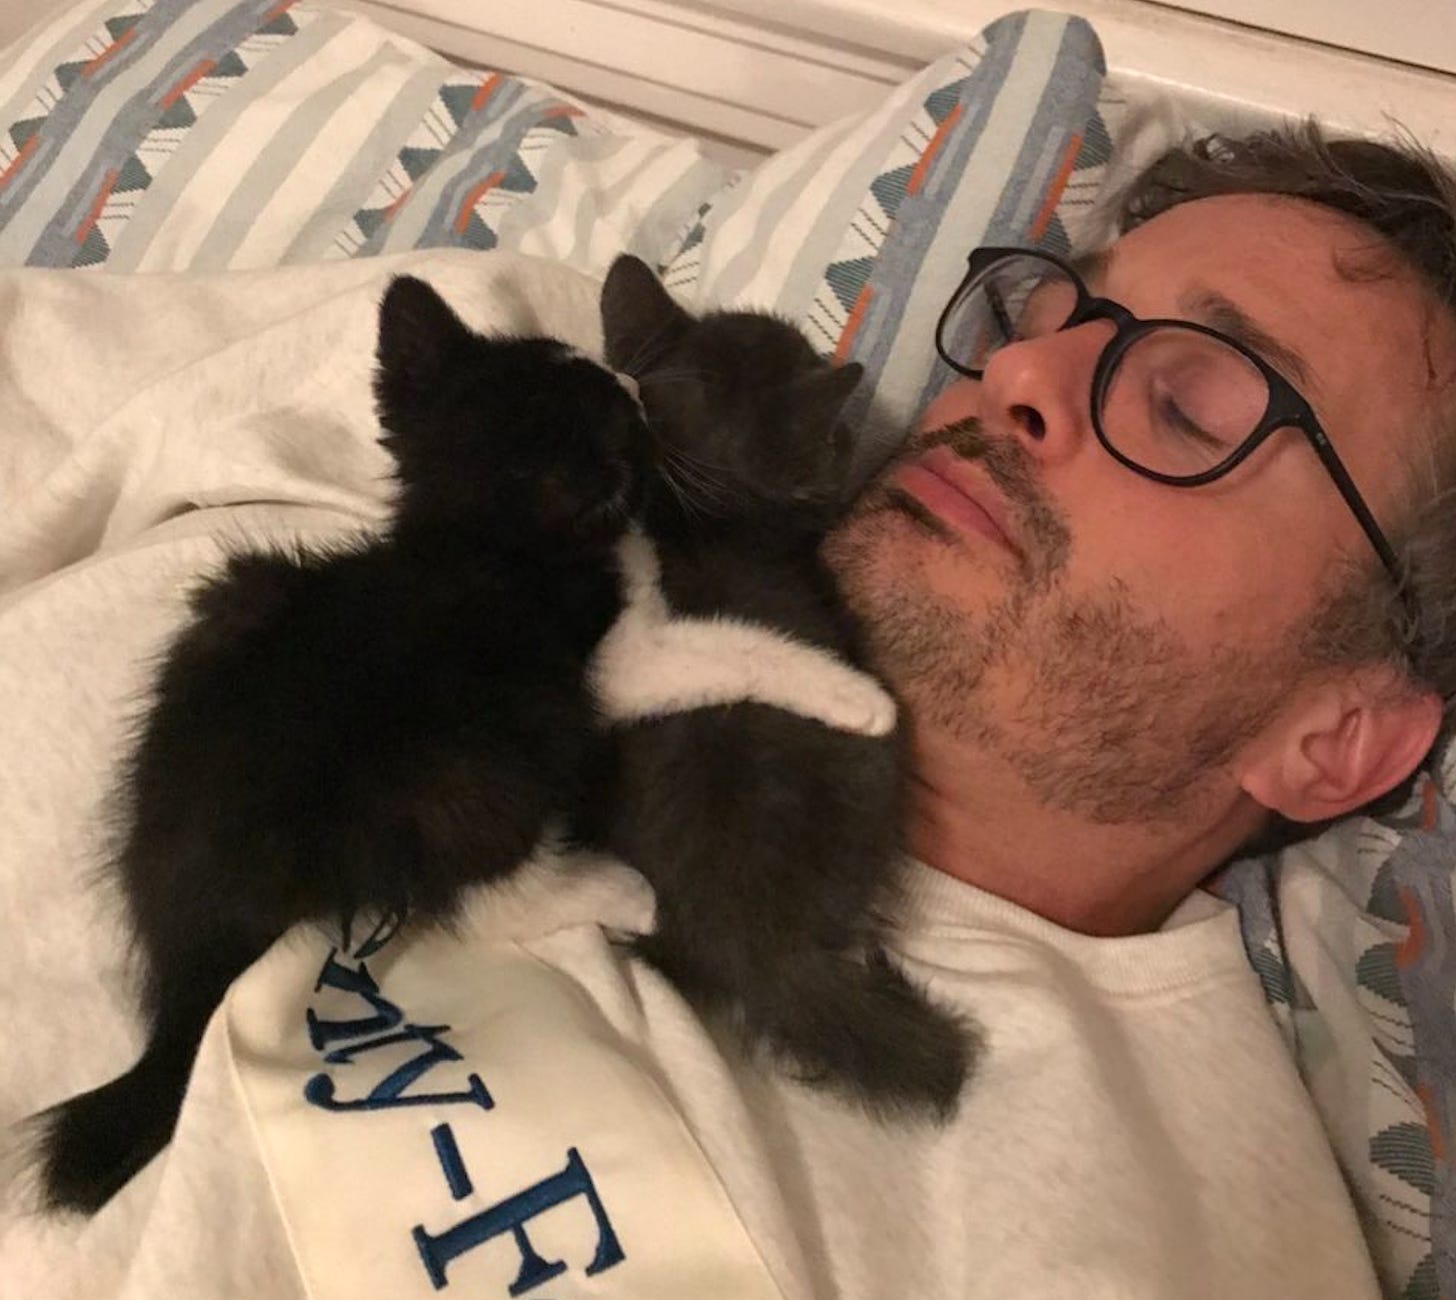 me with two kittens sleeping on me!